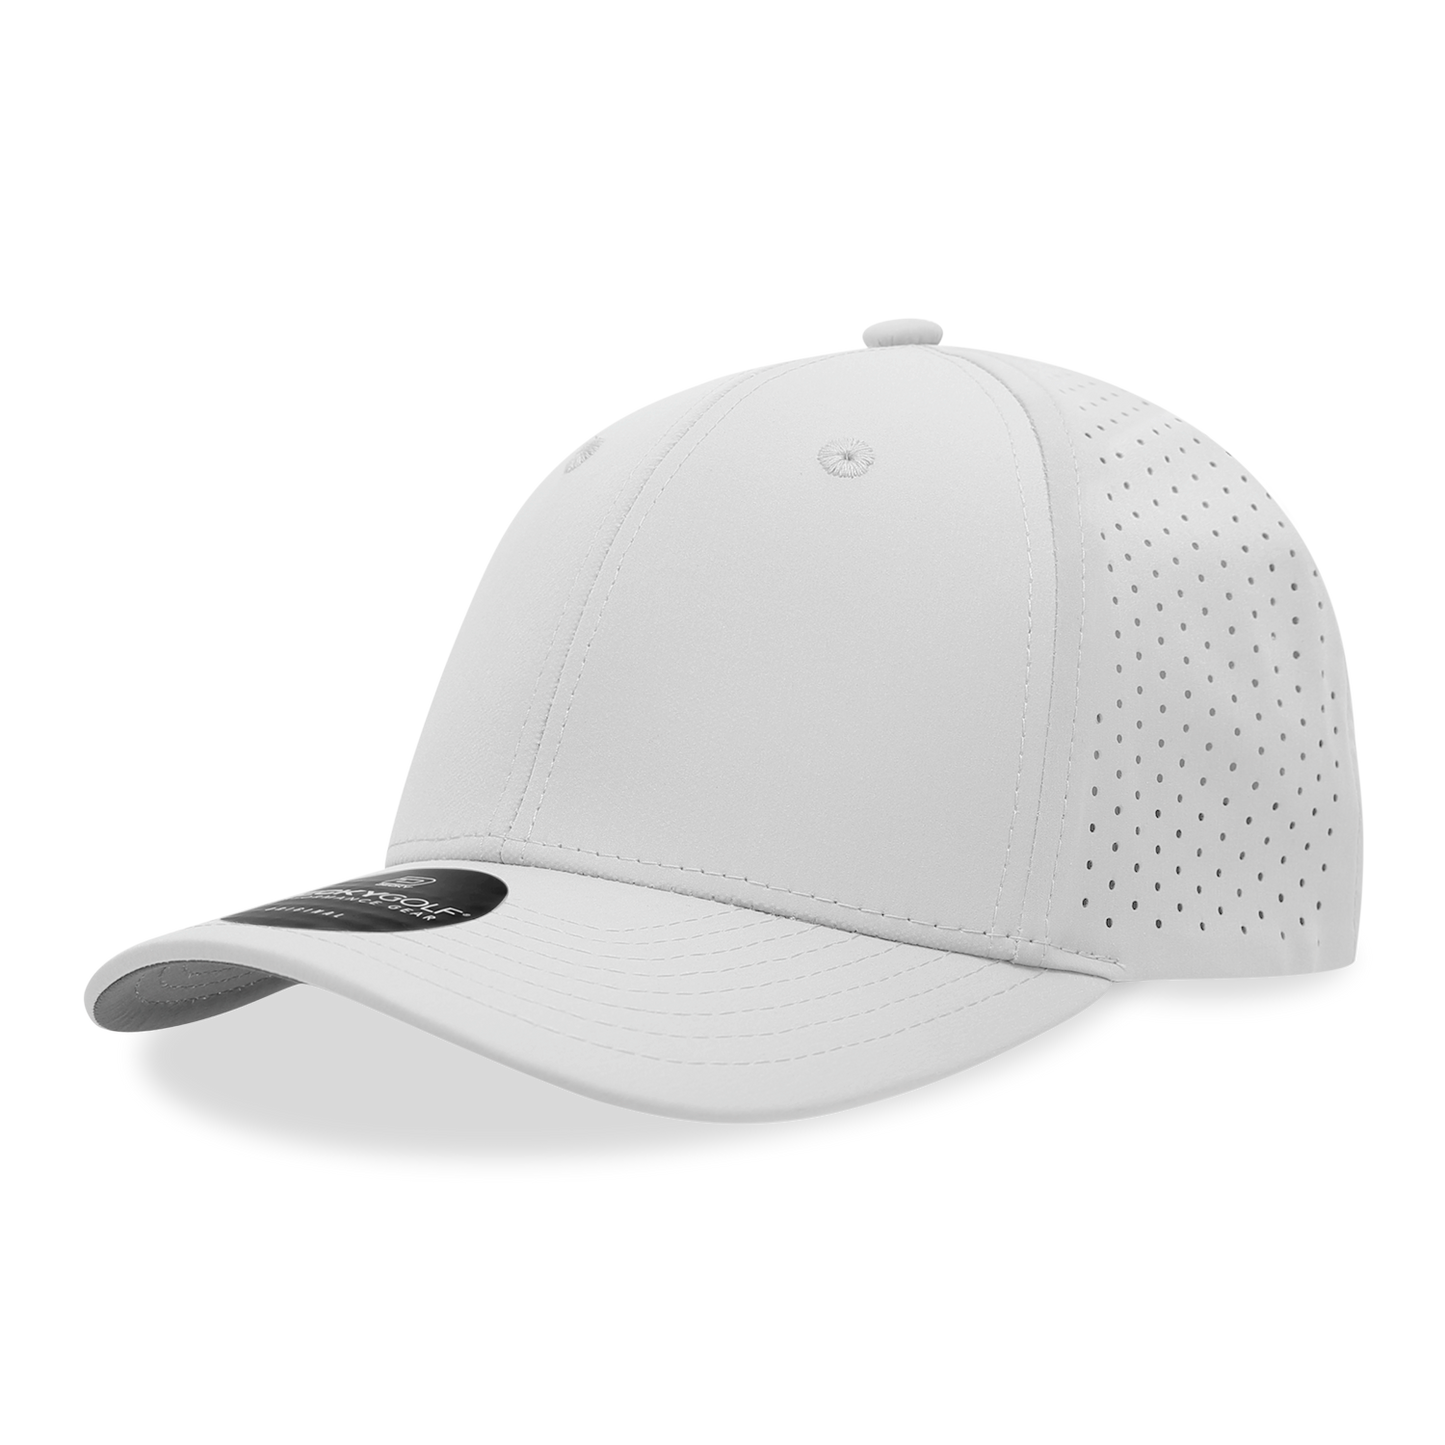 Decky 6412 6 Panel Mid Prof Perforated Cap